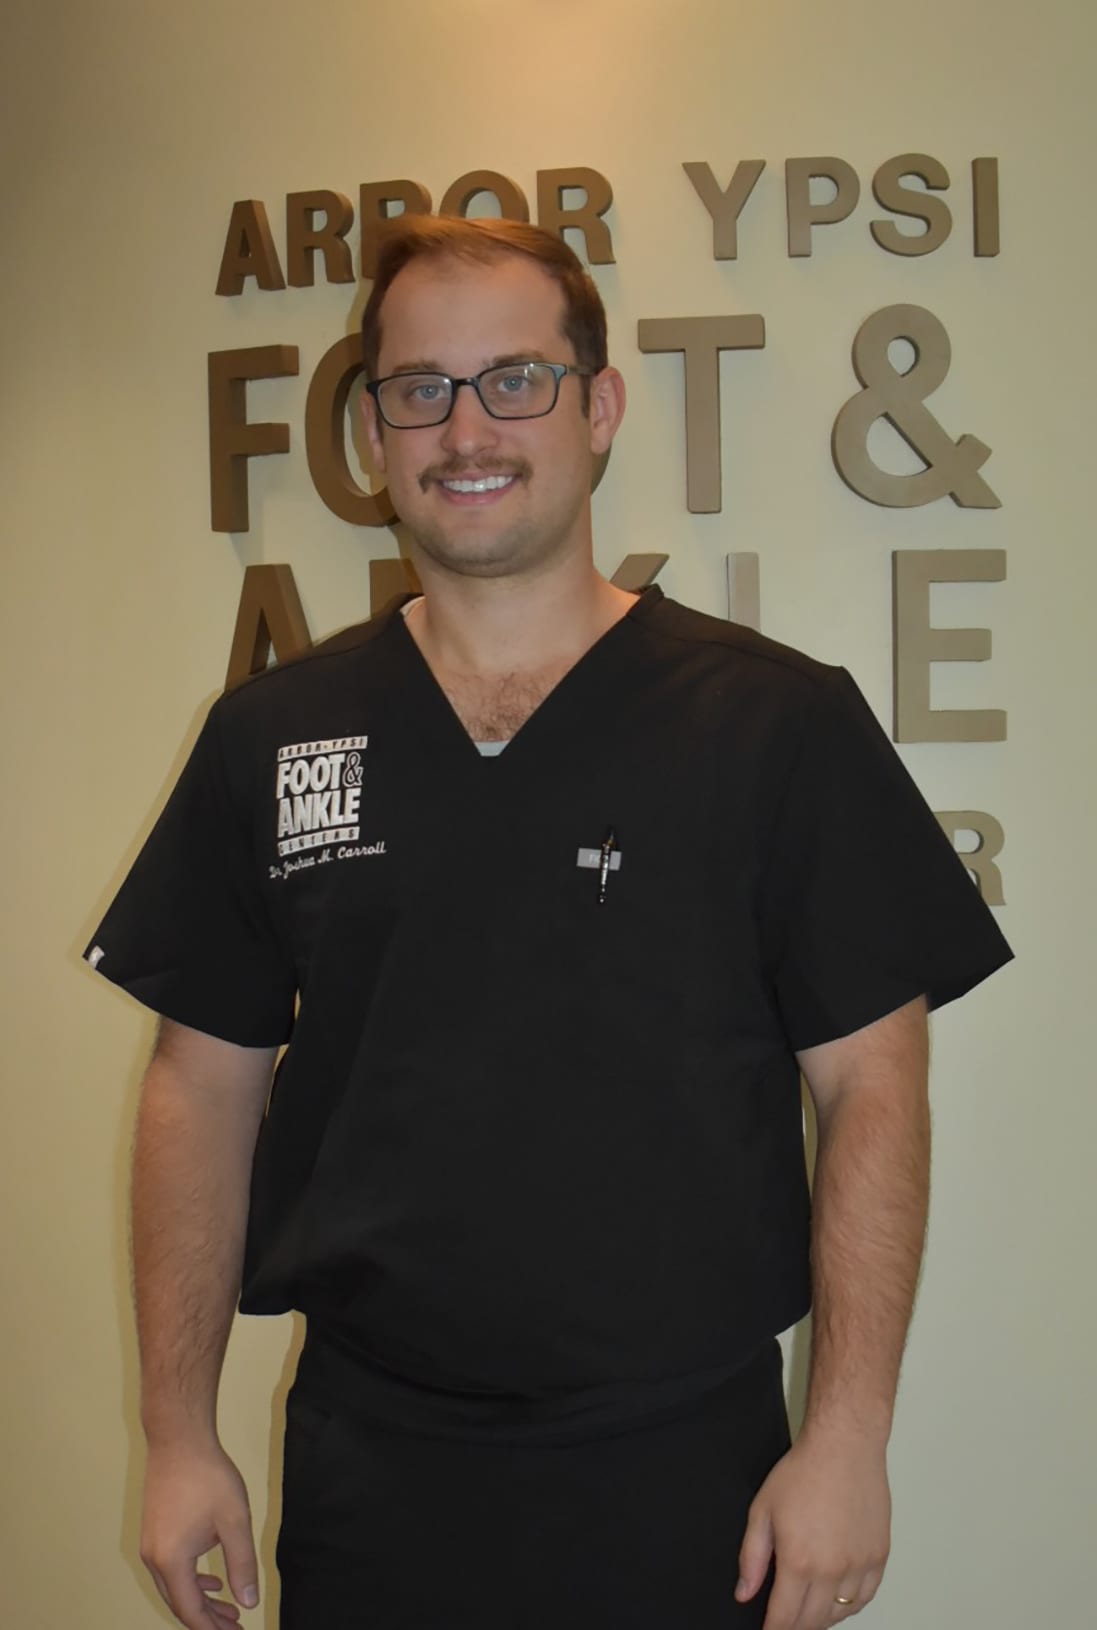 Dr. Joshua Carroll Ann Arbor Foot & Ankle Surgeon. Arbor - Ypsi Foot & Ankle Centers